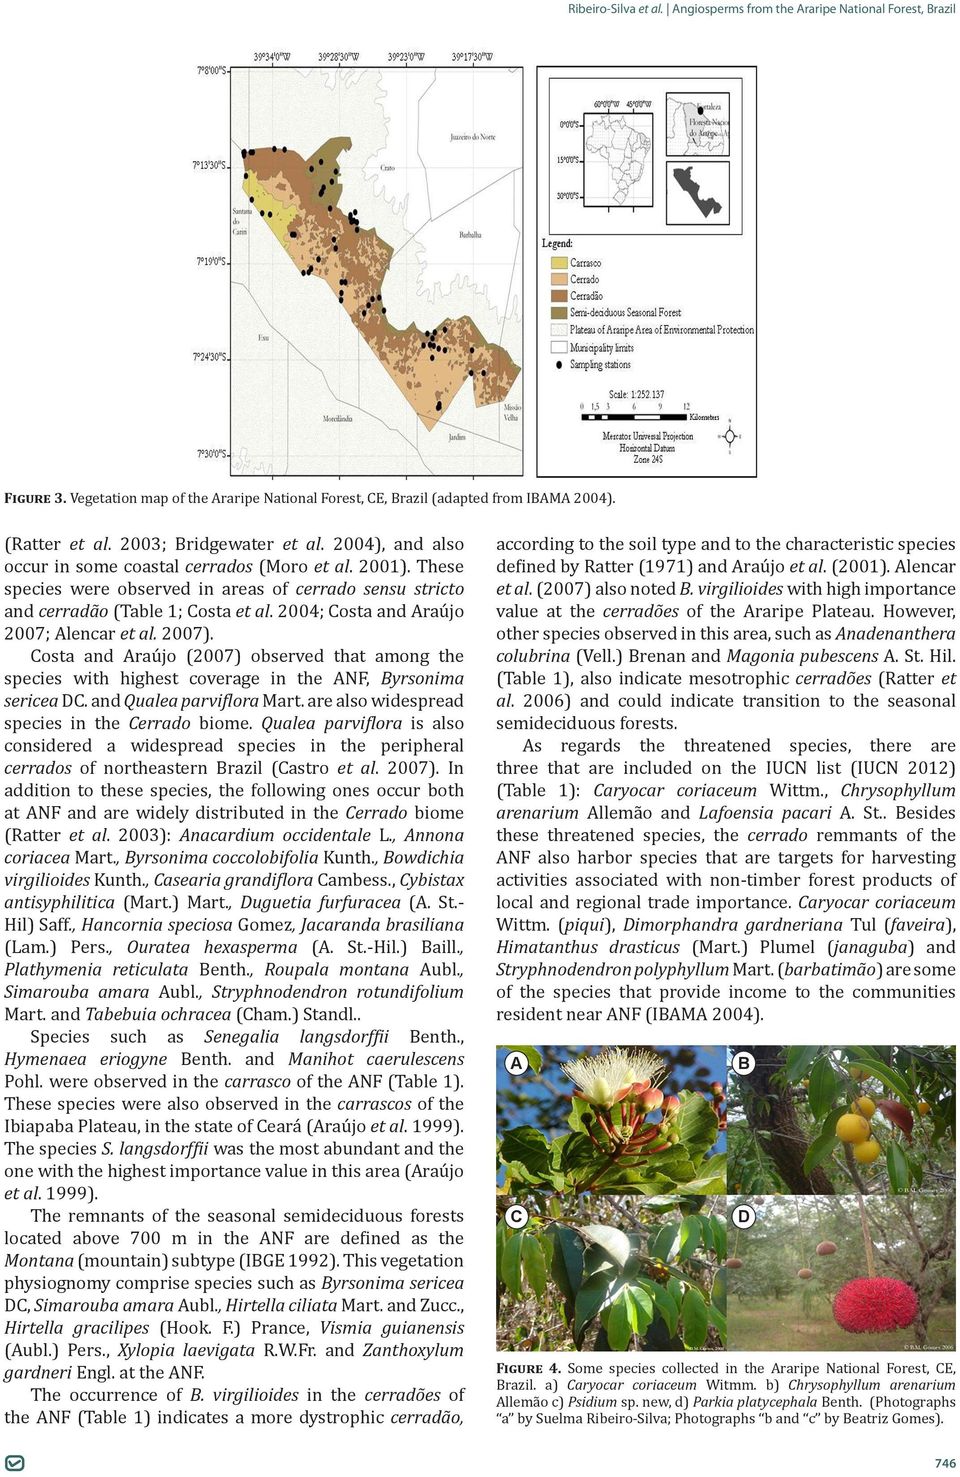 Costa and Araújo (2007) observed that among the species with highest coverage in the ANF, Byrsonima sericea DC. and Qualea parviflora Mart. are also widespread species in the Cerrado biome.